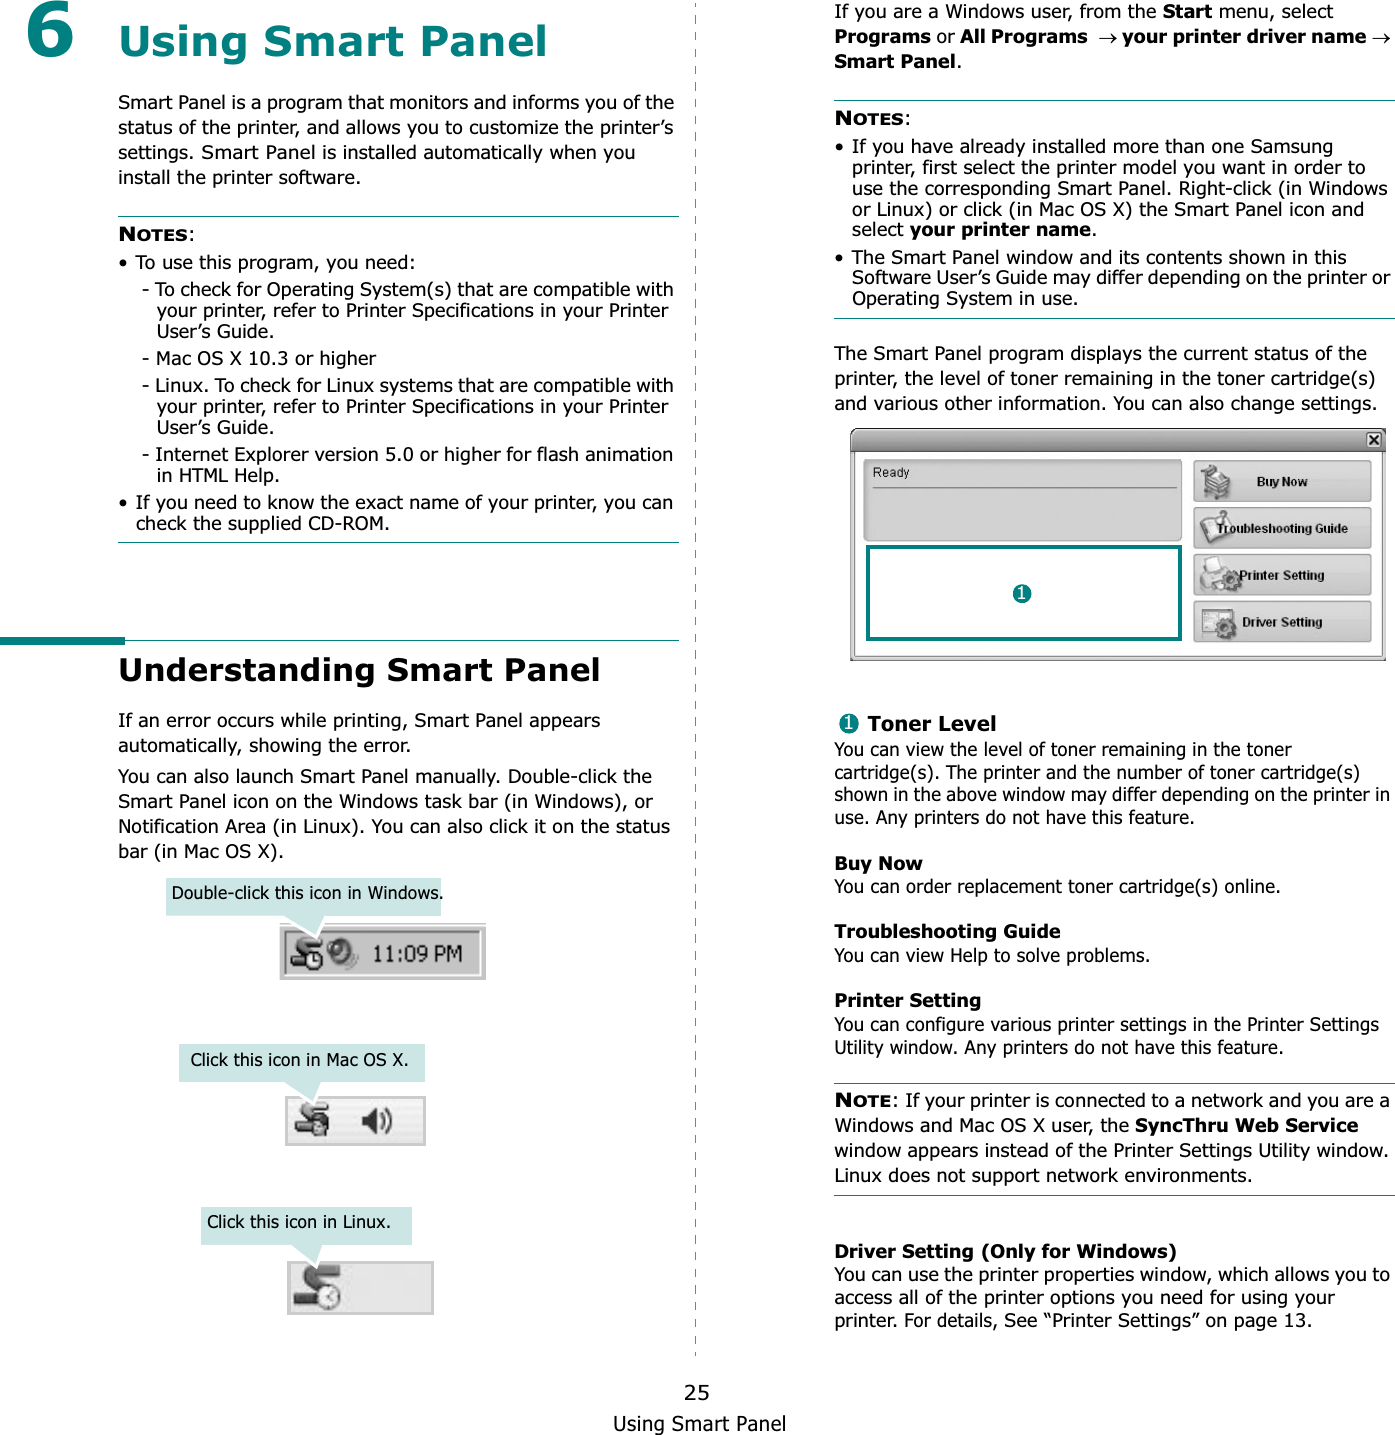 Using Smart Panel256Using Smart PanelSmart Panel is a program that monitors and informs you of the status of the printer, and allows you to customize the printer’s settings. Smart Panel is installed automatically when you install the printer software.NOTES:• To use this program, you need:- To check for Operating System(s) that are compatible with your printer, refer to Printer Specifications in your Printer User’s Guide.- Mac OS X 10.3 or higher- Linux. To check for Linux systems that are compatible with your printer, refer to Printer Specifications in your Printer User’s Guide.- Internet Explorer version 5.0 or higher for flash animation in HTML Help.• If you need to know the exact name of your printer, you can check the supplied CD-ROM.Understanding Smart PanelIf an error occurs while printing, Smart Panel appears automatically, showing the error.You can also launch Smart Panel manually. Double-click the Smart Panel icon on the Windows task bar (in Windows), or Notification Area (in Linux). You can also click it on the status bar (in Mac OS X).Double-click this icon in Windows.Click this icon in Mac OS X.Click this icon in Linux.If you are a Windows user, from the Start menu, select Programs or All Programsoyour printer driver nameoSmart Panel.NOTES:• If you have already installed more than one Samsung printer, first select the printer model you want in order to use the corresponding Smart Panel. Right-click (in Windows or Linux) or click (in Mac OS X) the Smart Panel icon and select your printer name.• The Smart Panel window and its contents shown in this Software User’s Guide may differ depending on the printer or Operating System in use.The Smart Panel program displays the current status of the printer, the level of toner remaining in the toner cartridge(s) and various other information. You can also change settings.Toner LevelYou can view the level of toner remaining in the toner cartridge(s). The printer and the number of toner cartridge(s) shown in the above window may differ depending on the printer in use. Any printers do not have this feature.Buy NowYou can order replacement toner cartridge(s) online.Troubleshooting GuideYou can view Help to solve problems.Printer SettingYou can configure various printer settings in the Printer Settings Utility window. Any printers do not have this feature.NOTE: If your printer is connected to a network and you are a Windows and Mac OS X user, the SyncThru Web Servicewindow appears instead of the Printer Settings Utility window. Linux does not support network environments.Driver Setting (Only for Windows)You can use the printer properties window, which allows you to access all of the printer options you need for using your printer. For details, See “Printer Settings” on page 13.11